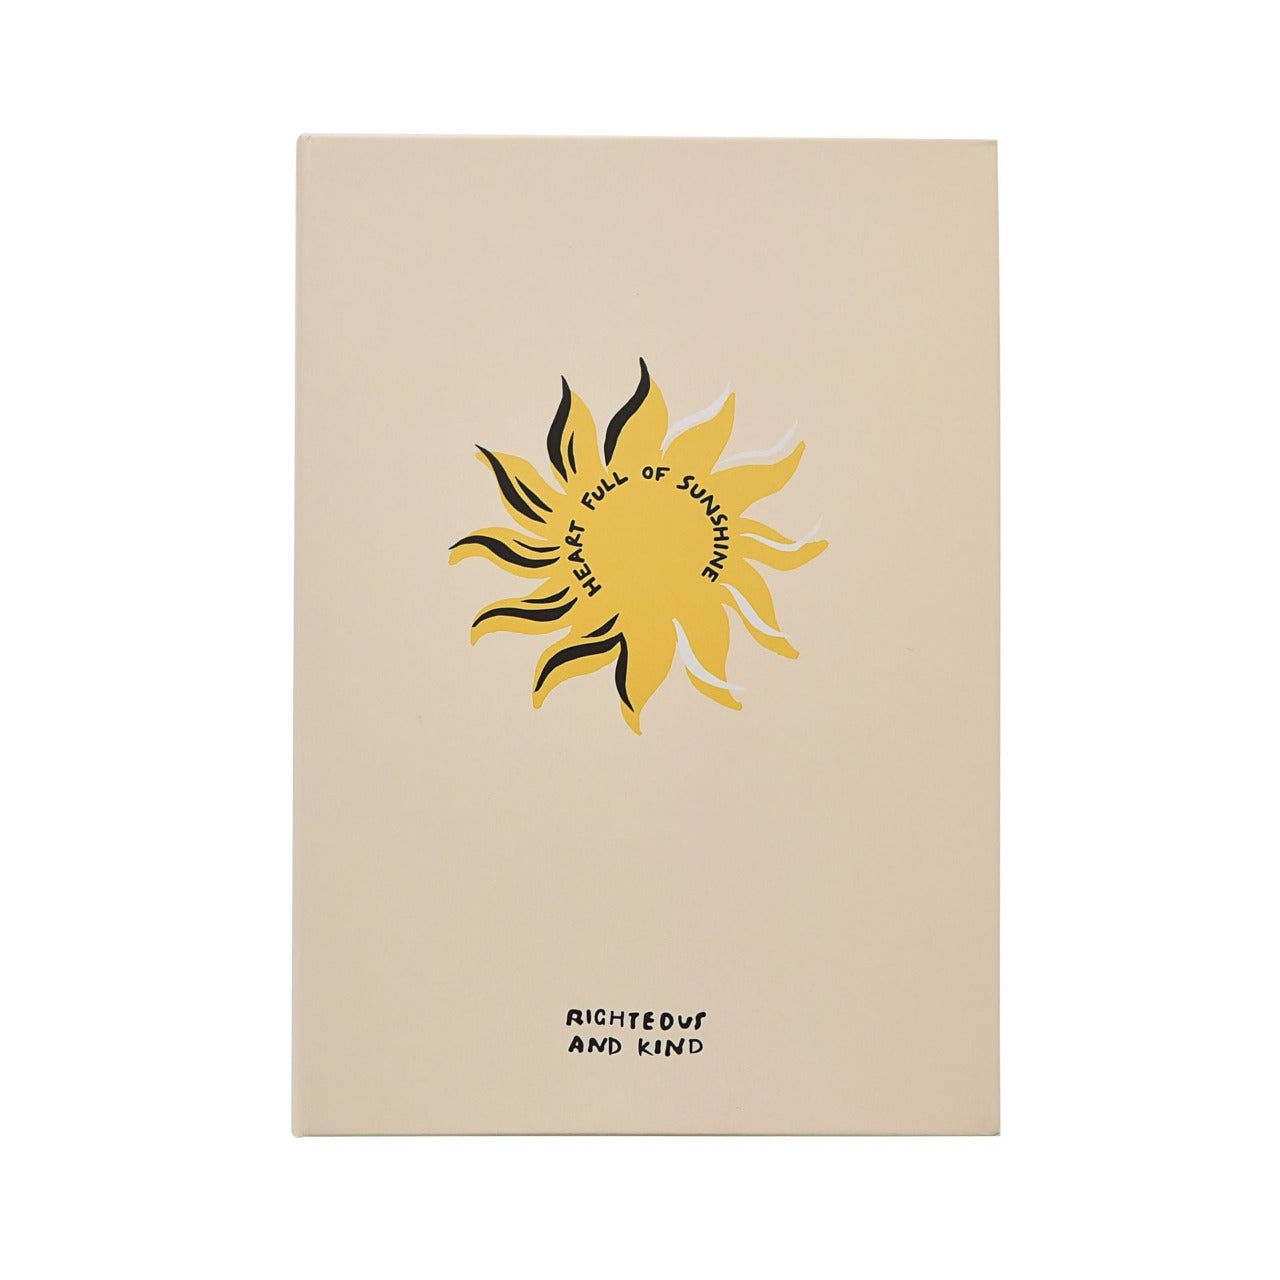 Righteous & Kind A5 Notebook  A stylish notebook that would make a beautiful gift for those who love to note down their thoughts or doodle. With a gold sun design, this would make a cute addition to any free spirit's stationary collection.